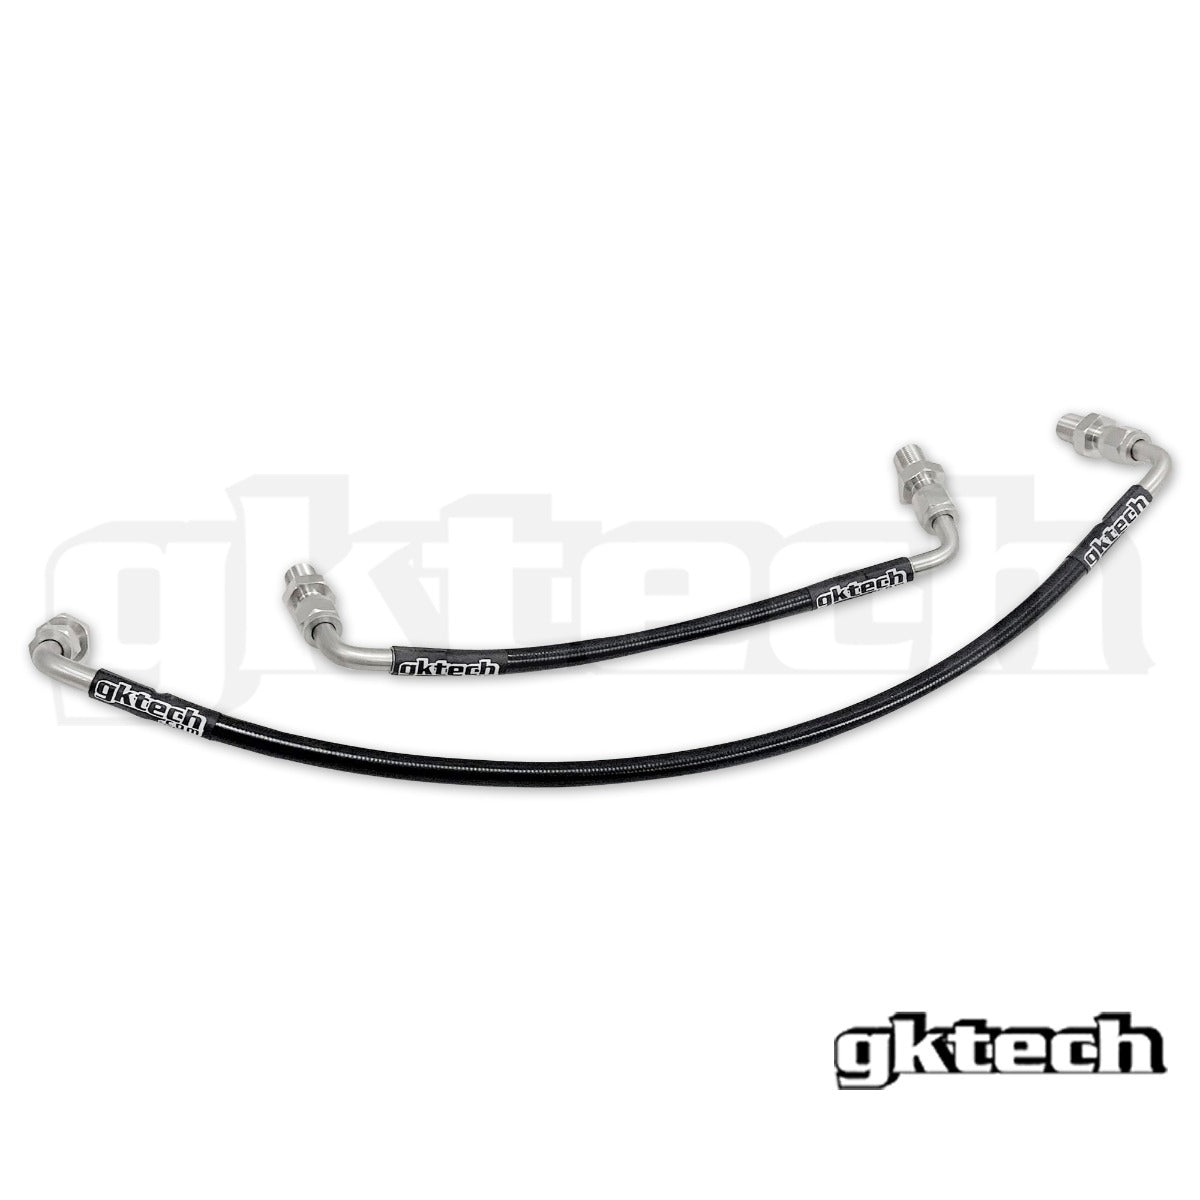 S13/S14 POWER STEERING HARD LINE REPLACEMENTS (PAIR)